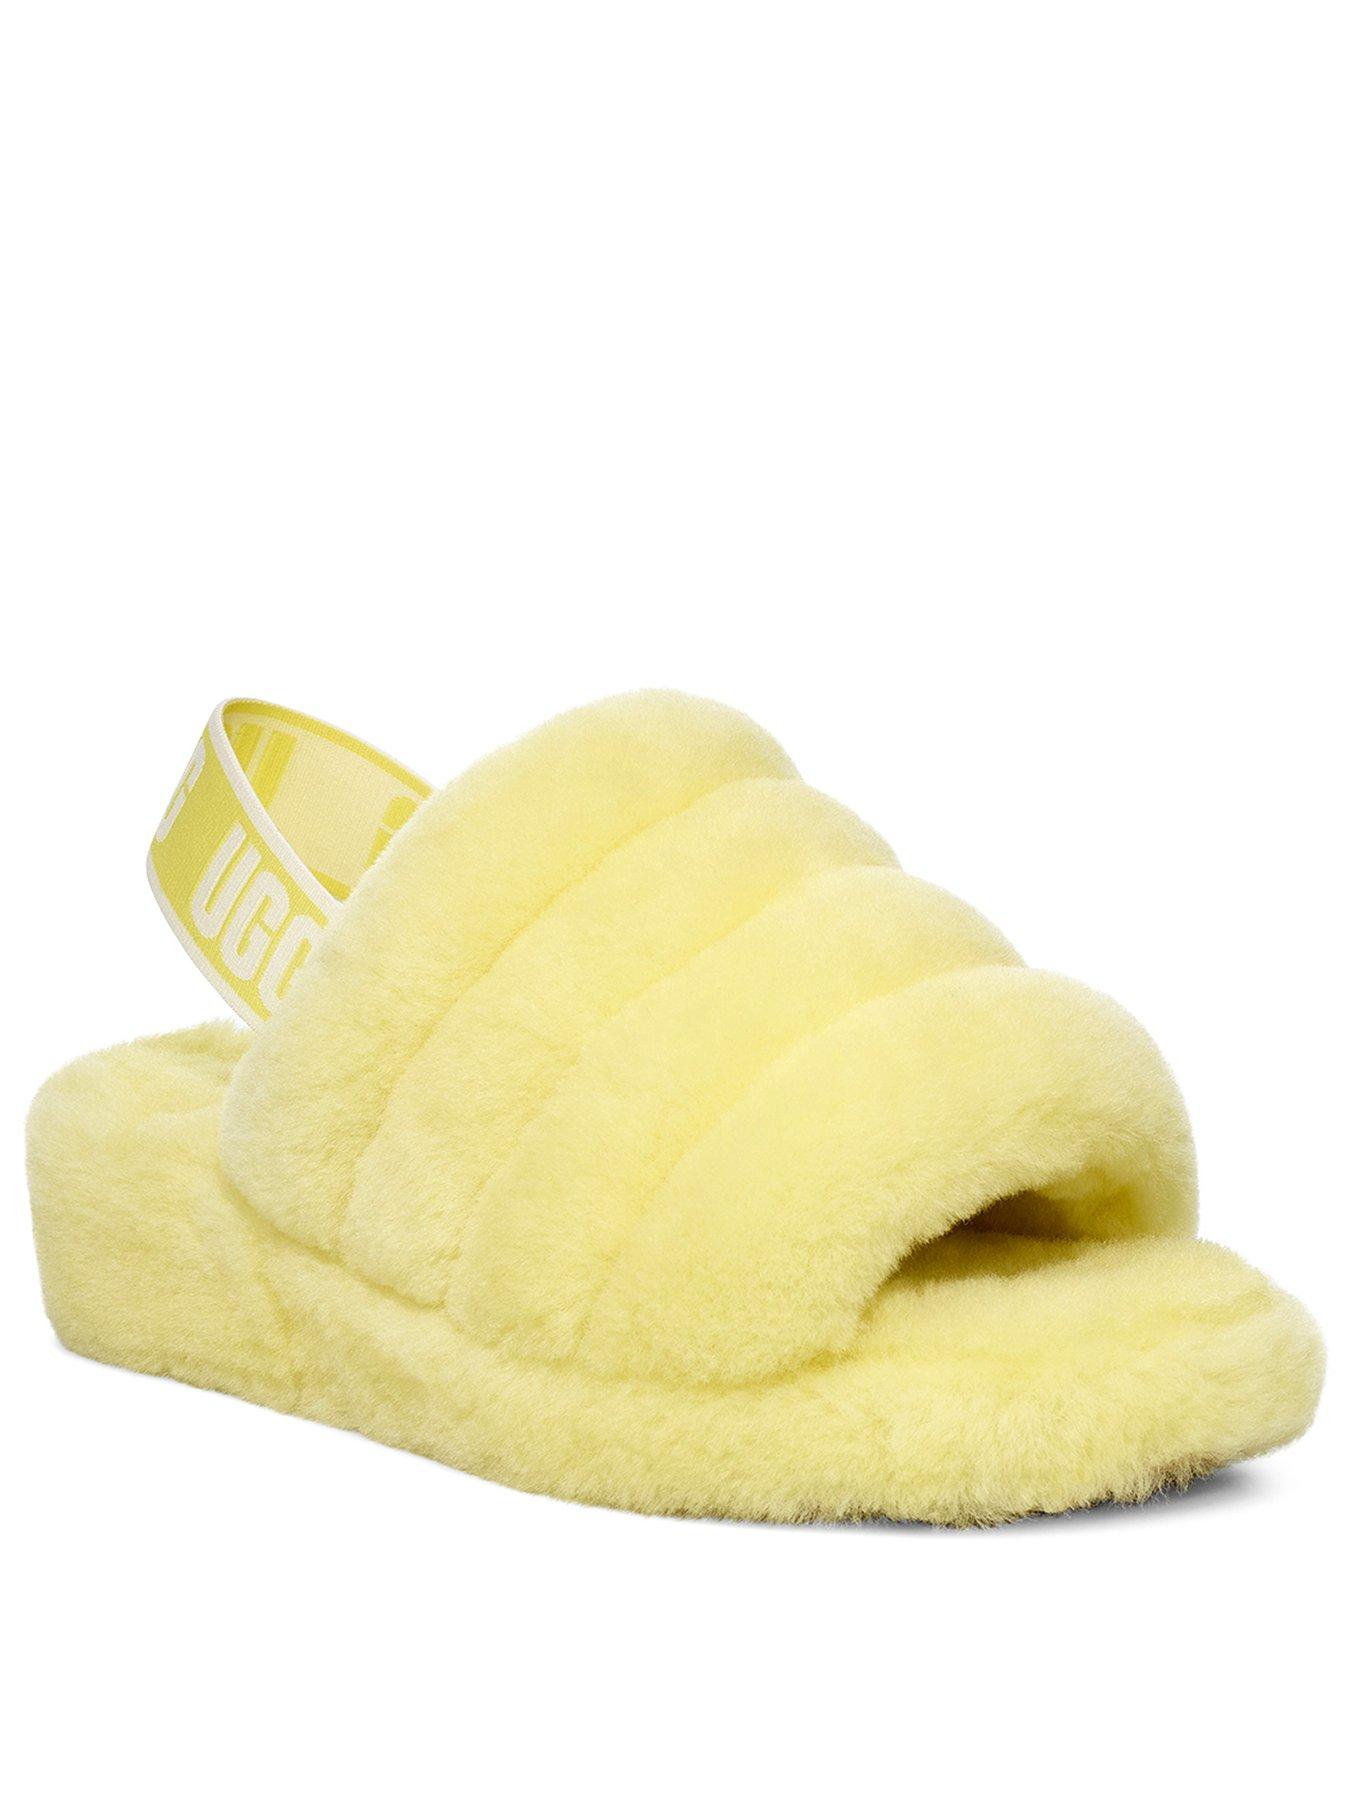 lime green ugg slippers